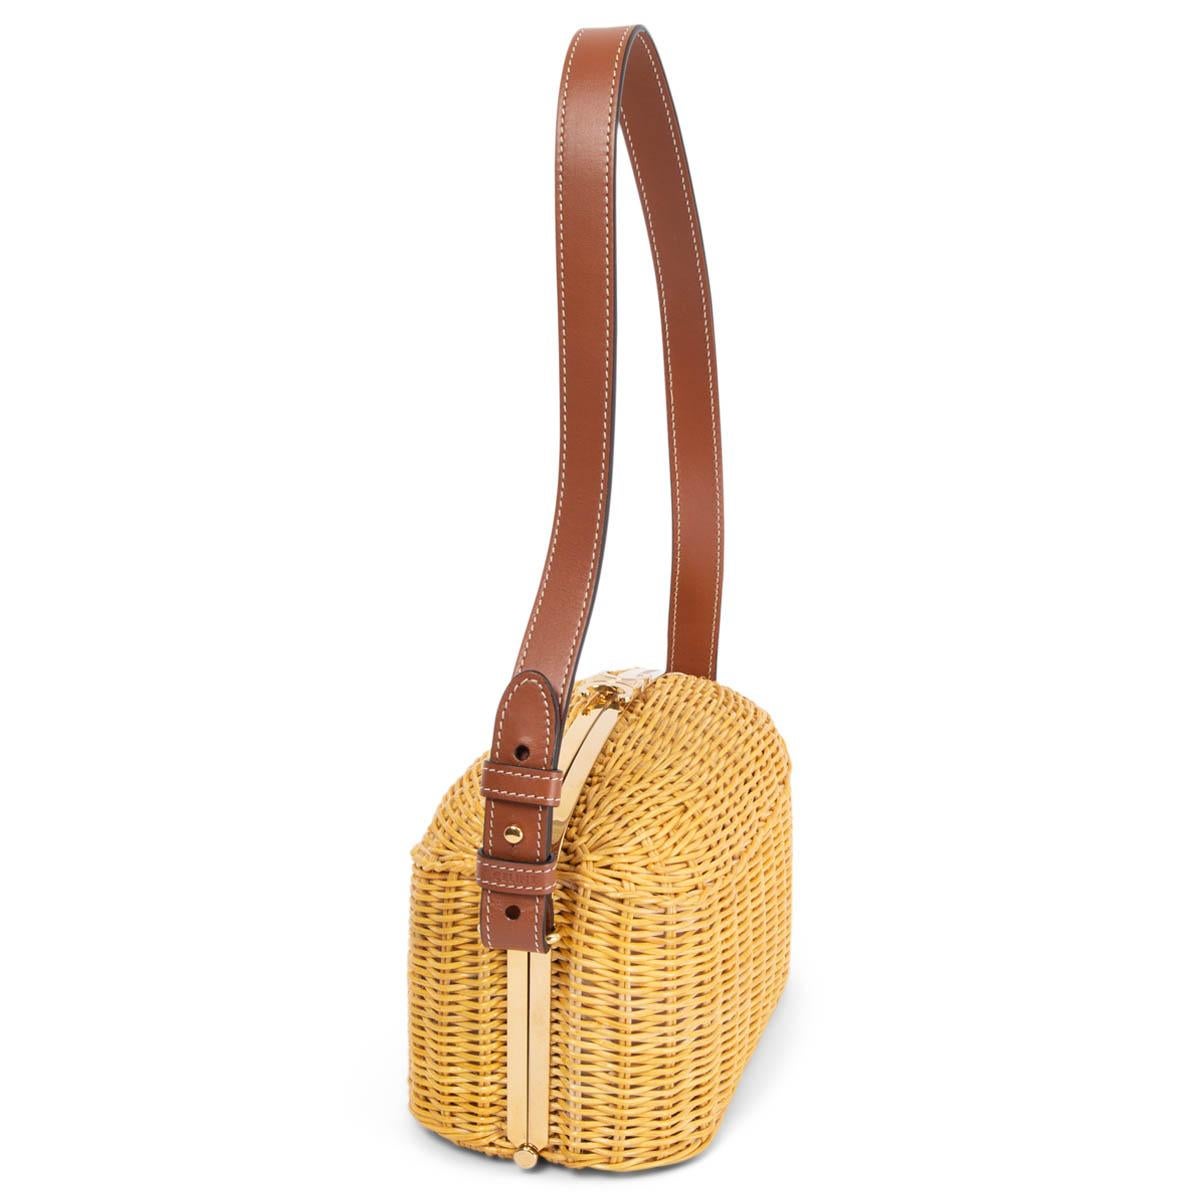 100% authentic Celine 2021 Lunch Box shoulder bag in natural wicker and tan calfskin shoulder-strap. Opens with a gold-tone frame logo clasp and is lined in tn leather with two compartments with one zip pocket in the middle. Brand new. Comes with